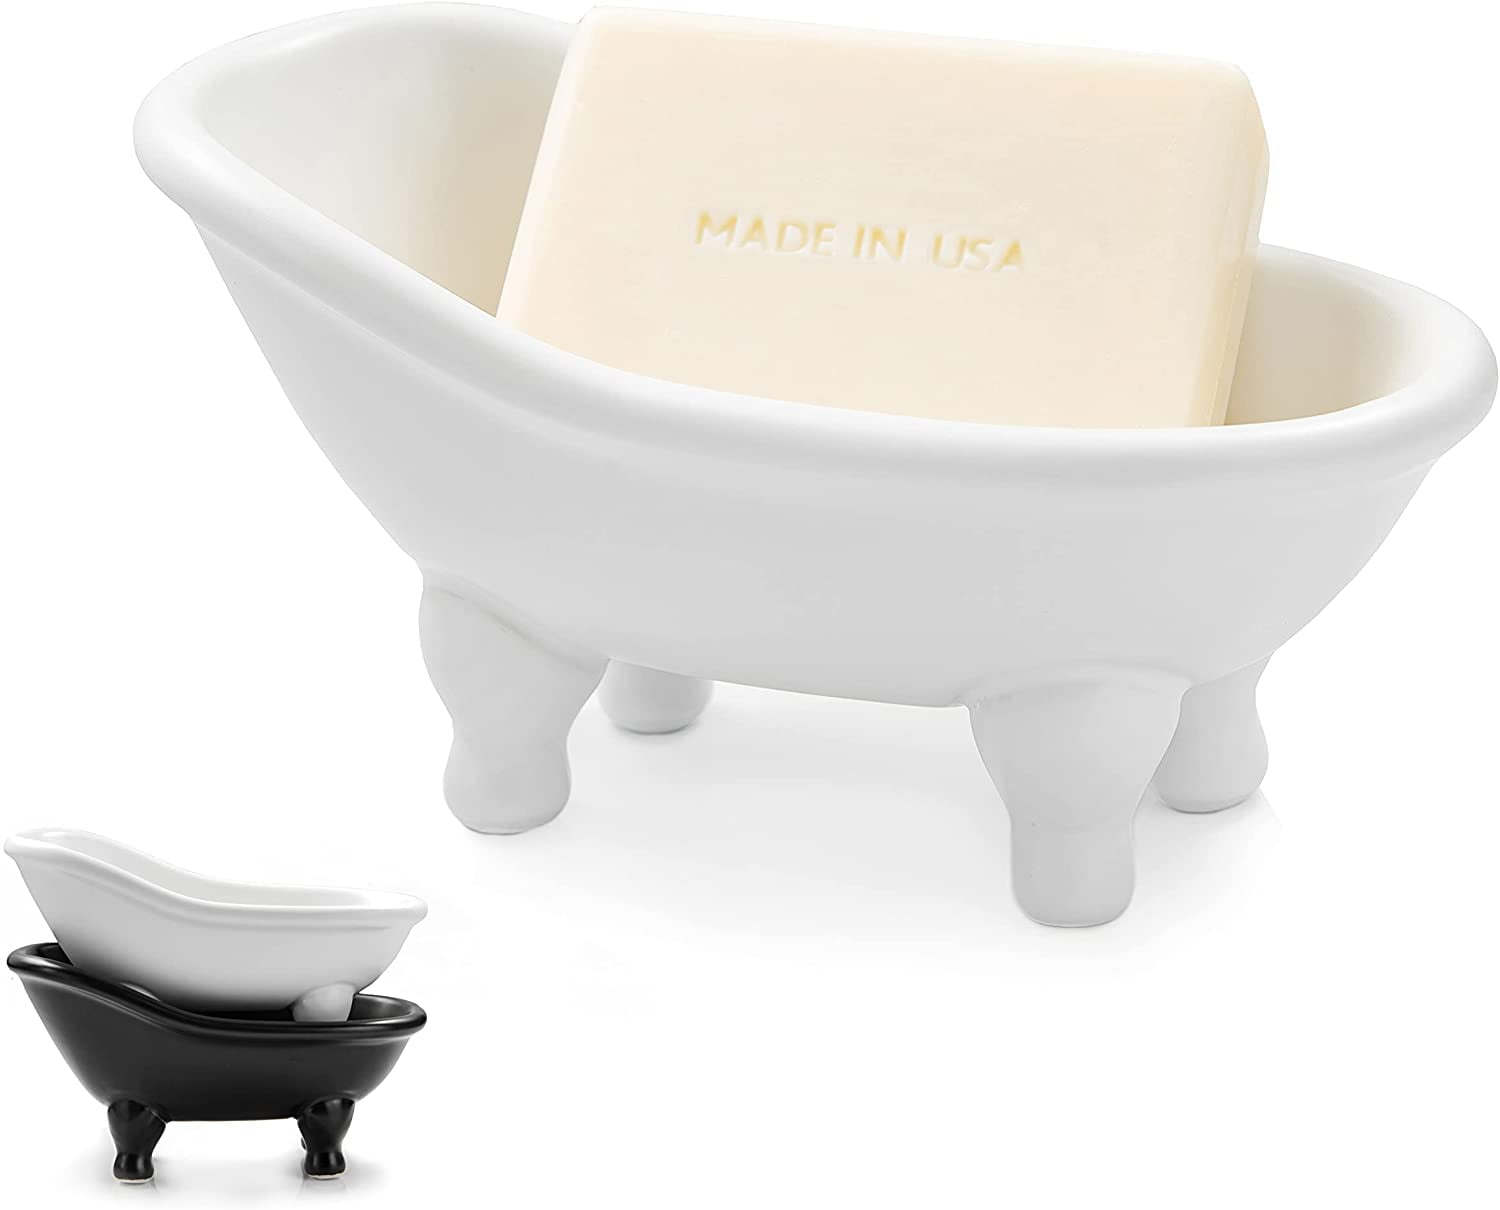 MyGift 6-Inch White Porcelain Petite French Country Style Claw Foot Bathtub Vintage Flower Pot Planter/Soap Dish